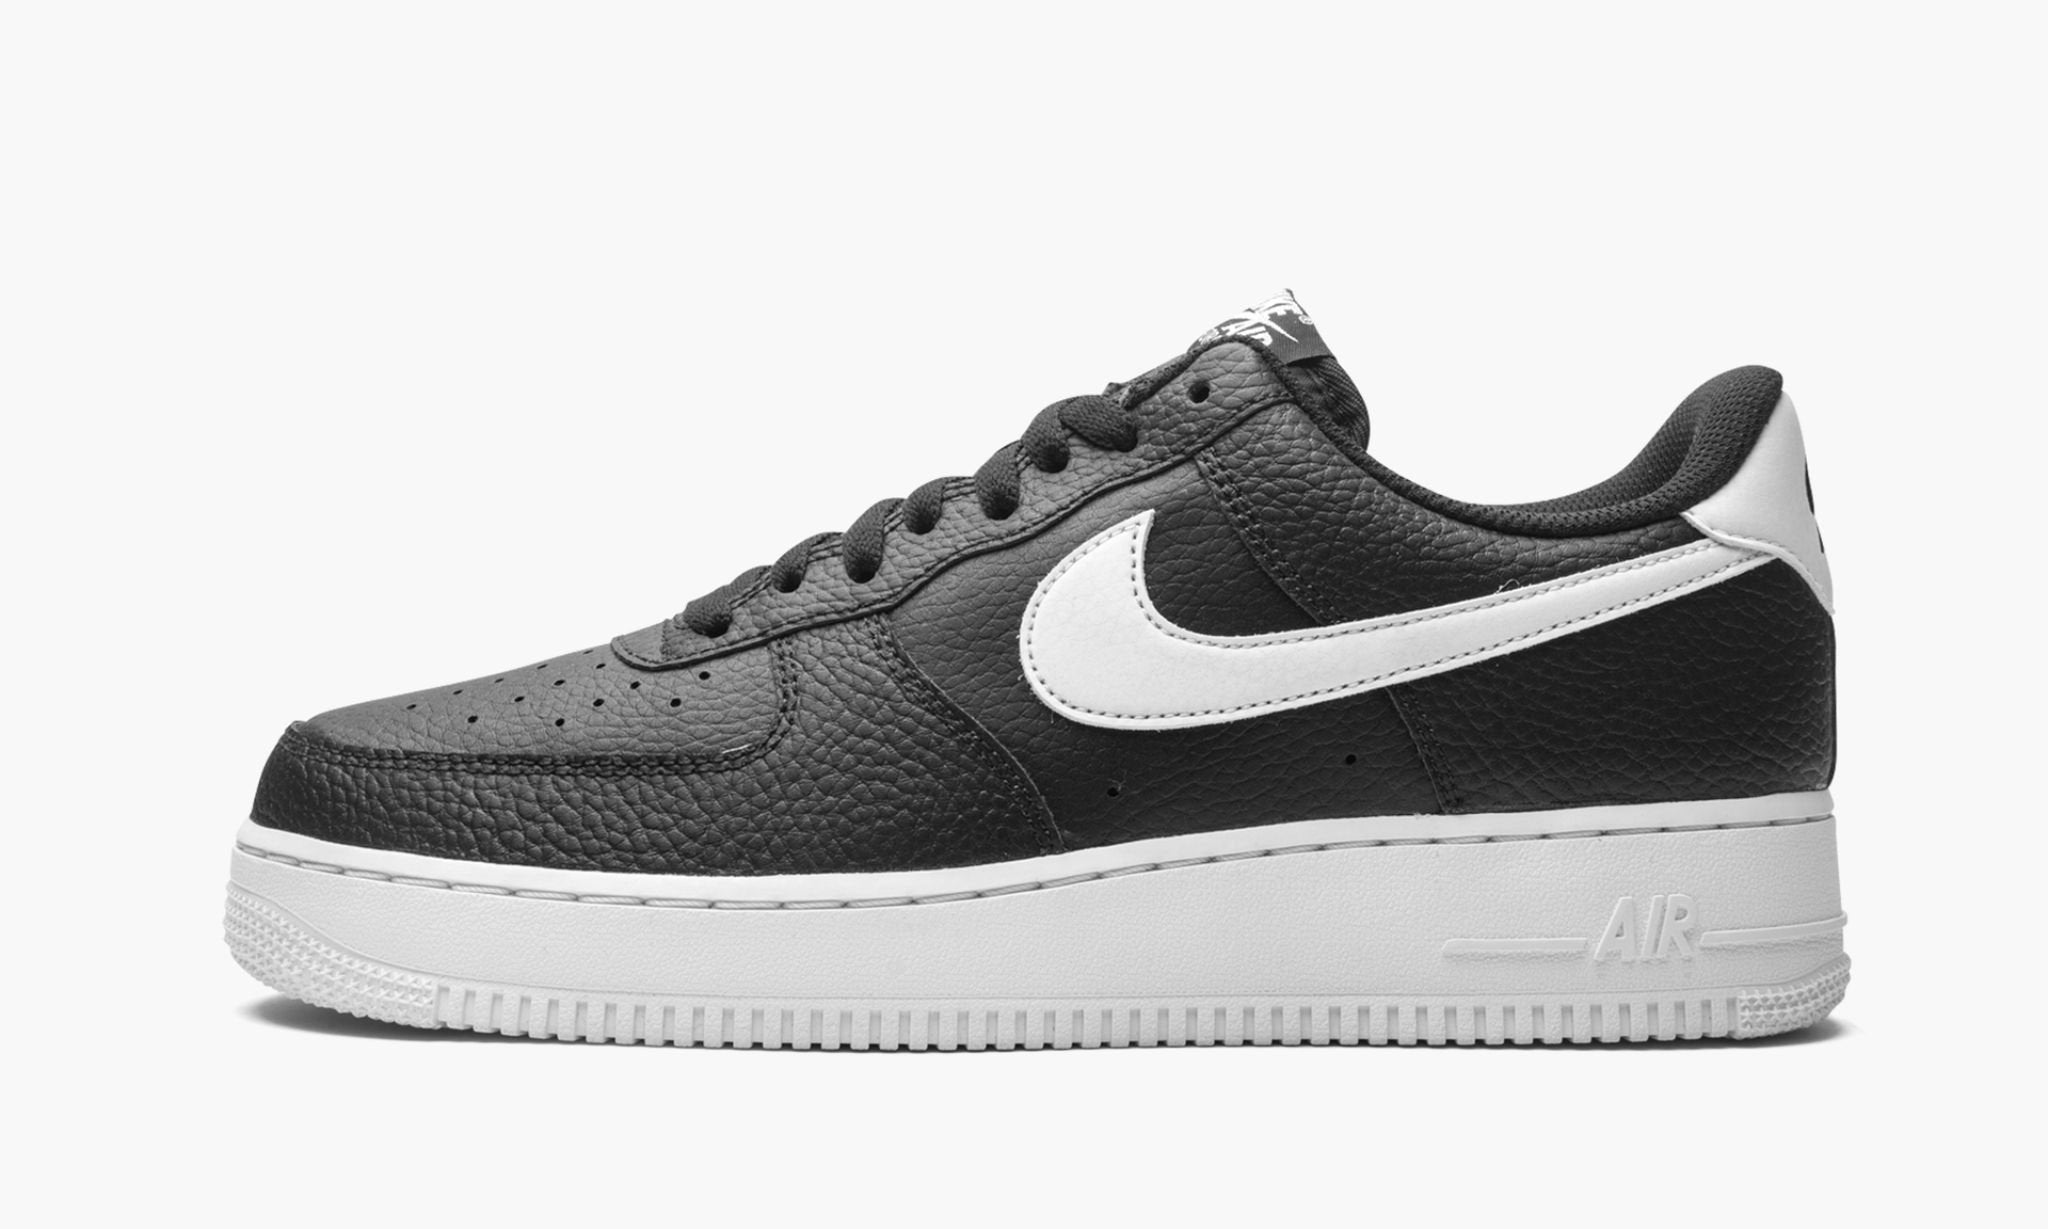 Air Force 1 Low ’07 “Black / White”